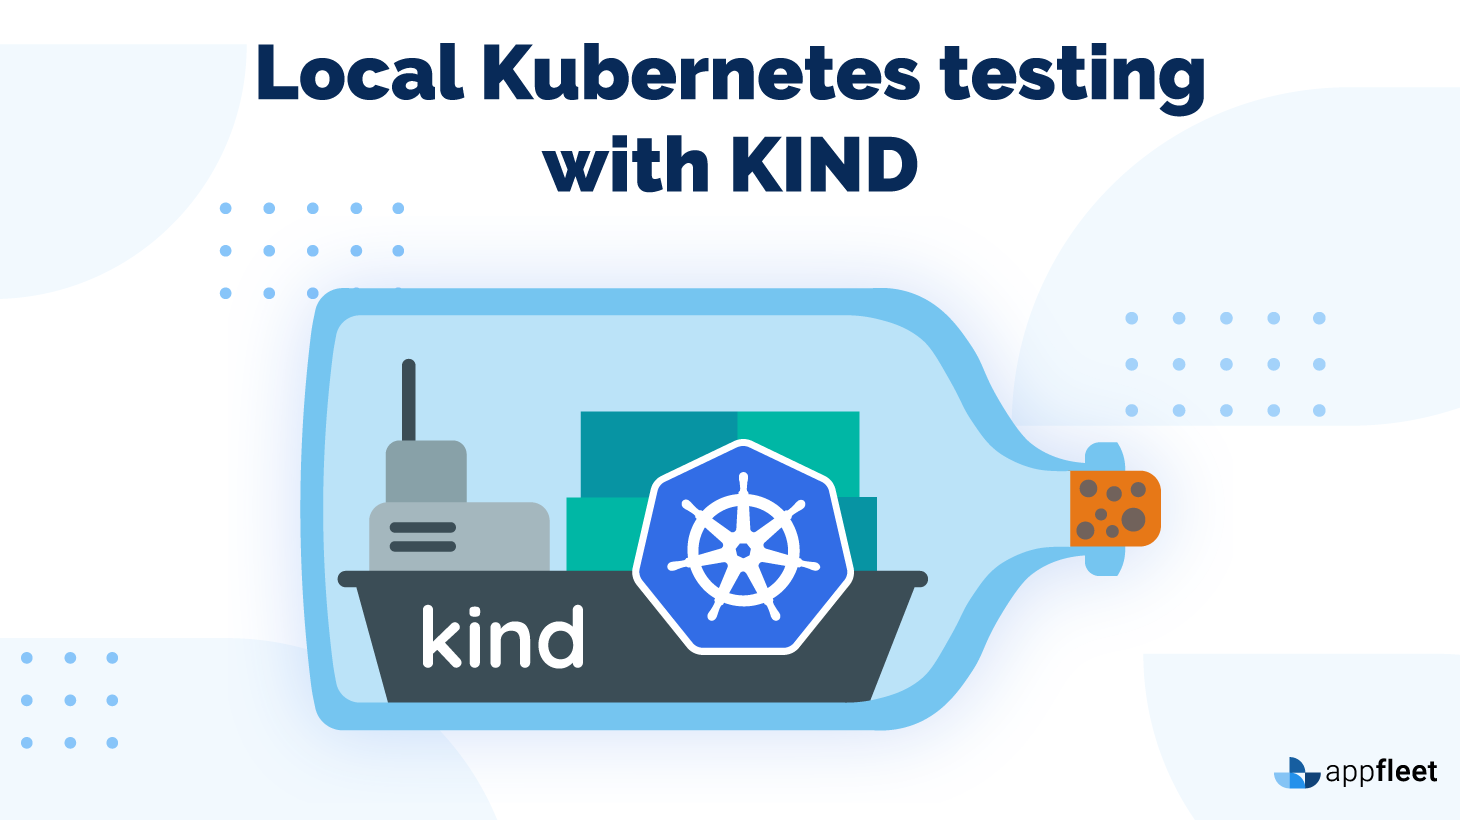 Local Kubernetes testing with KIND